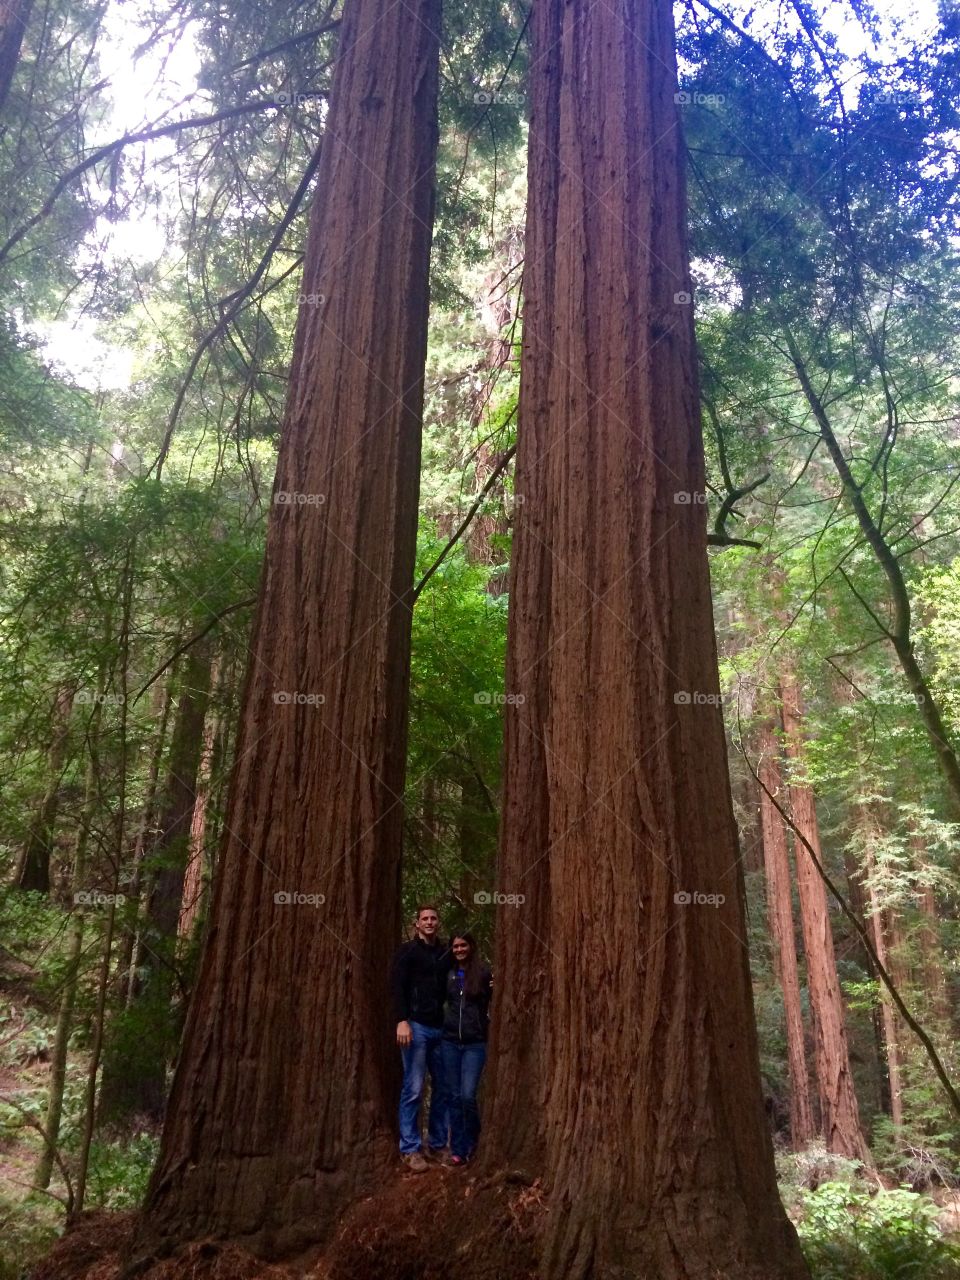 Red woods and romance . Trip to see the red woods with the guy that I Love. 